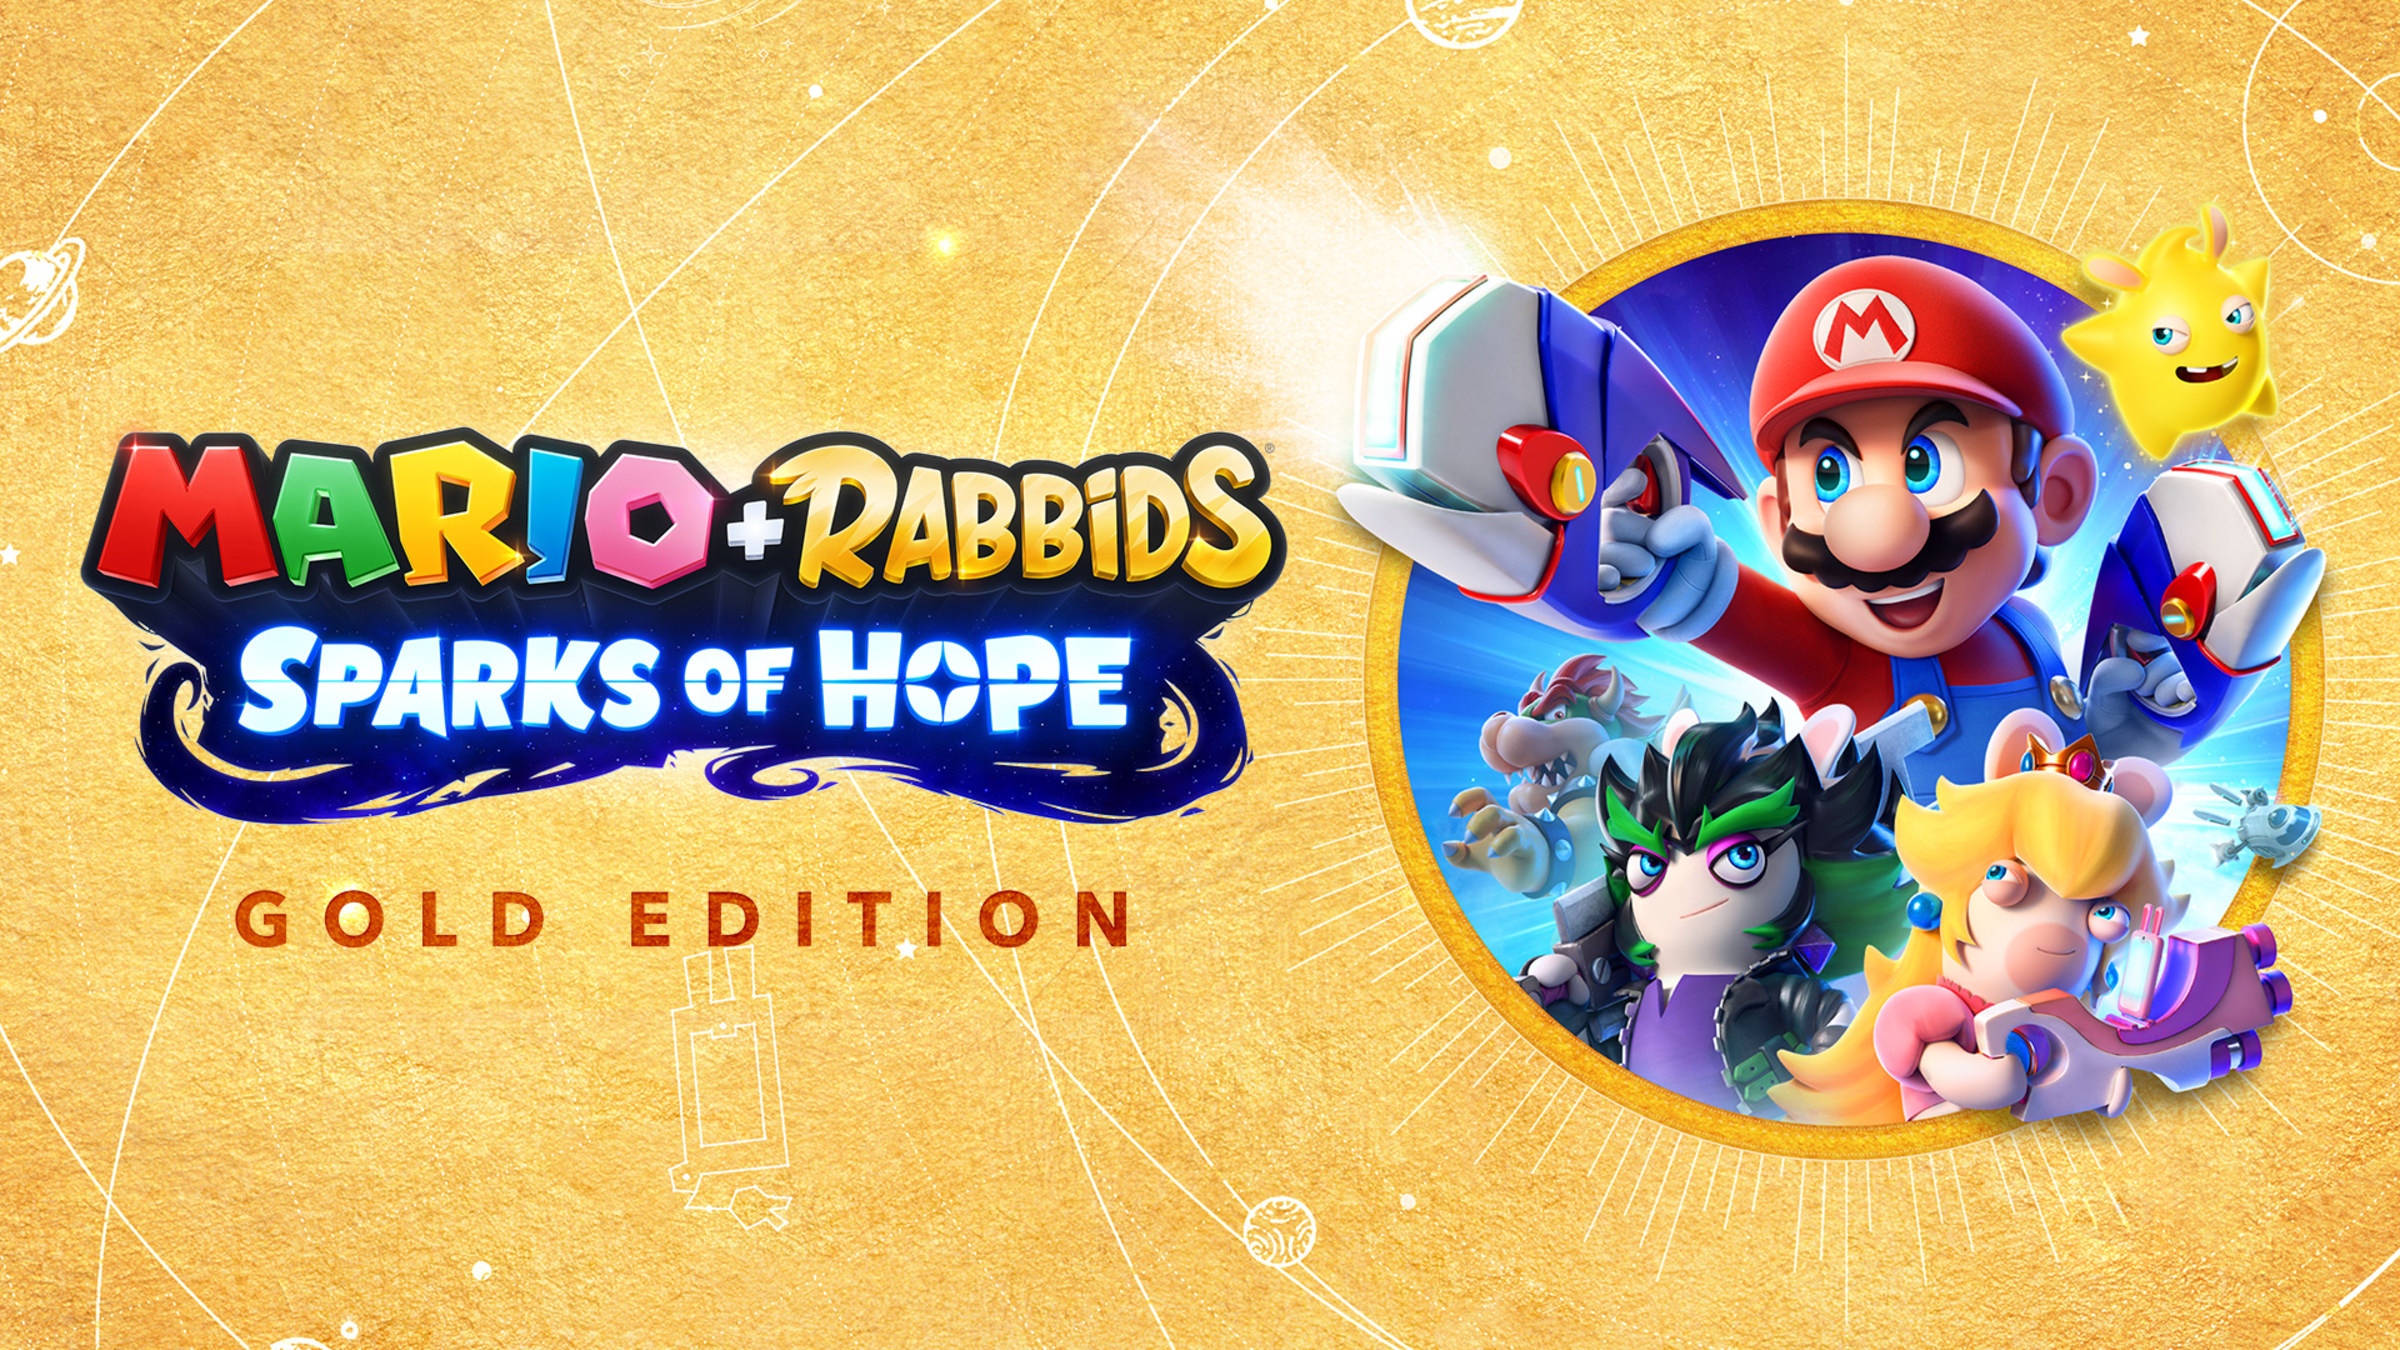 Mario + Rabbids® Sparks of Hope Gold Edition for Nintendo Switch - Nintendo  Official Site | Nintendo-Switch-Spiele